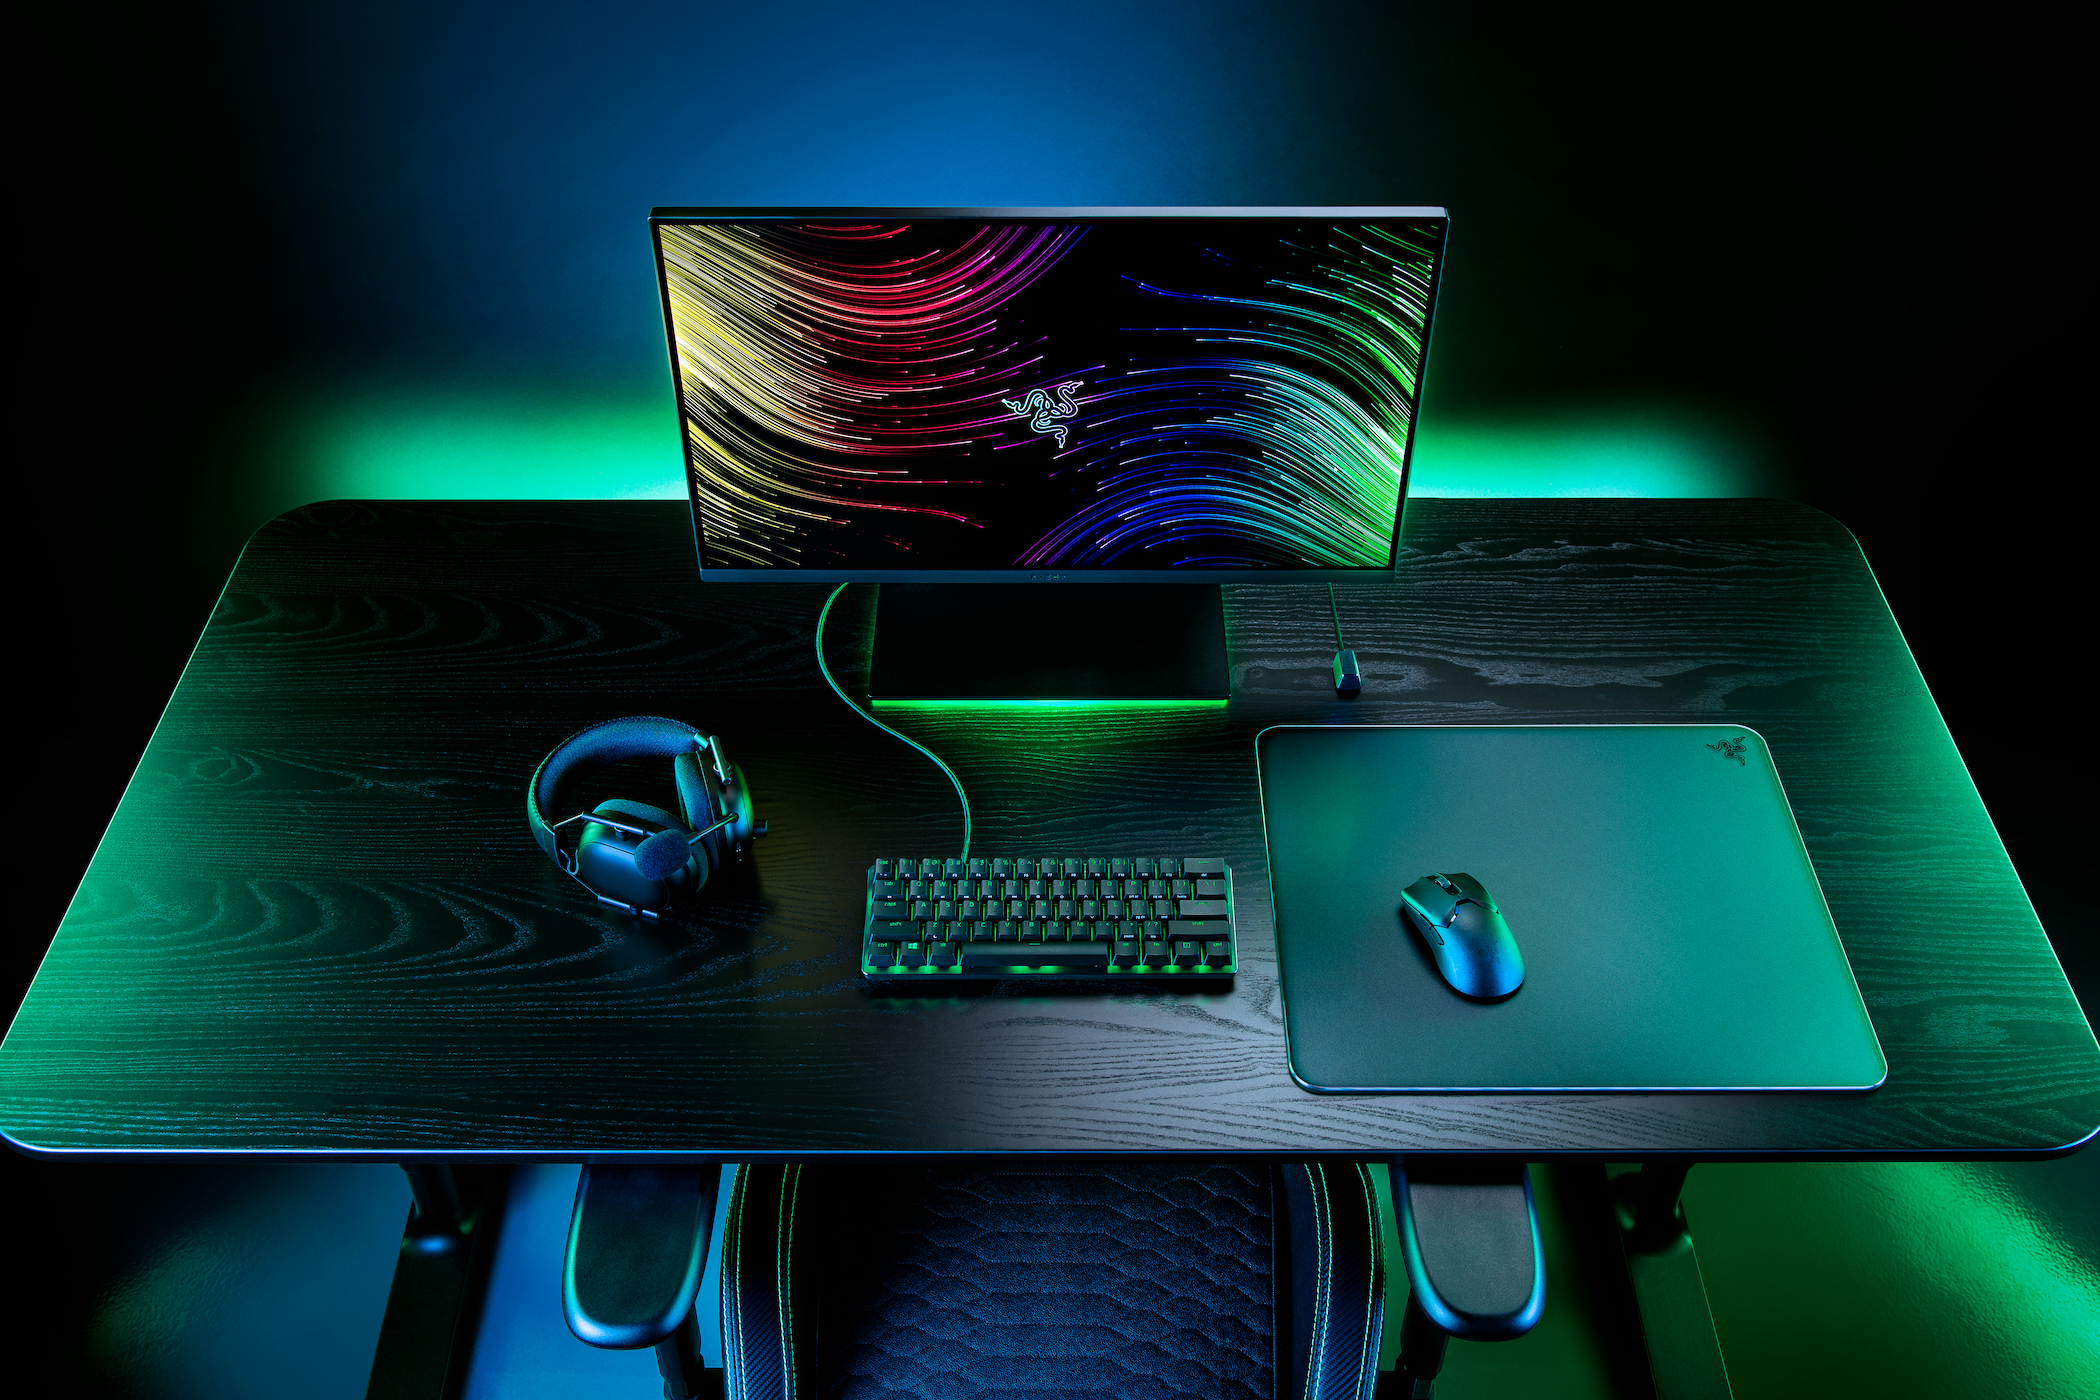 Razer's first tempered glass mouse mat helps improve your gaming style